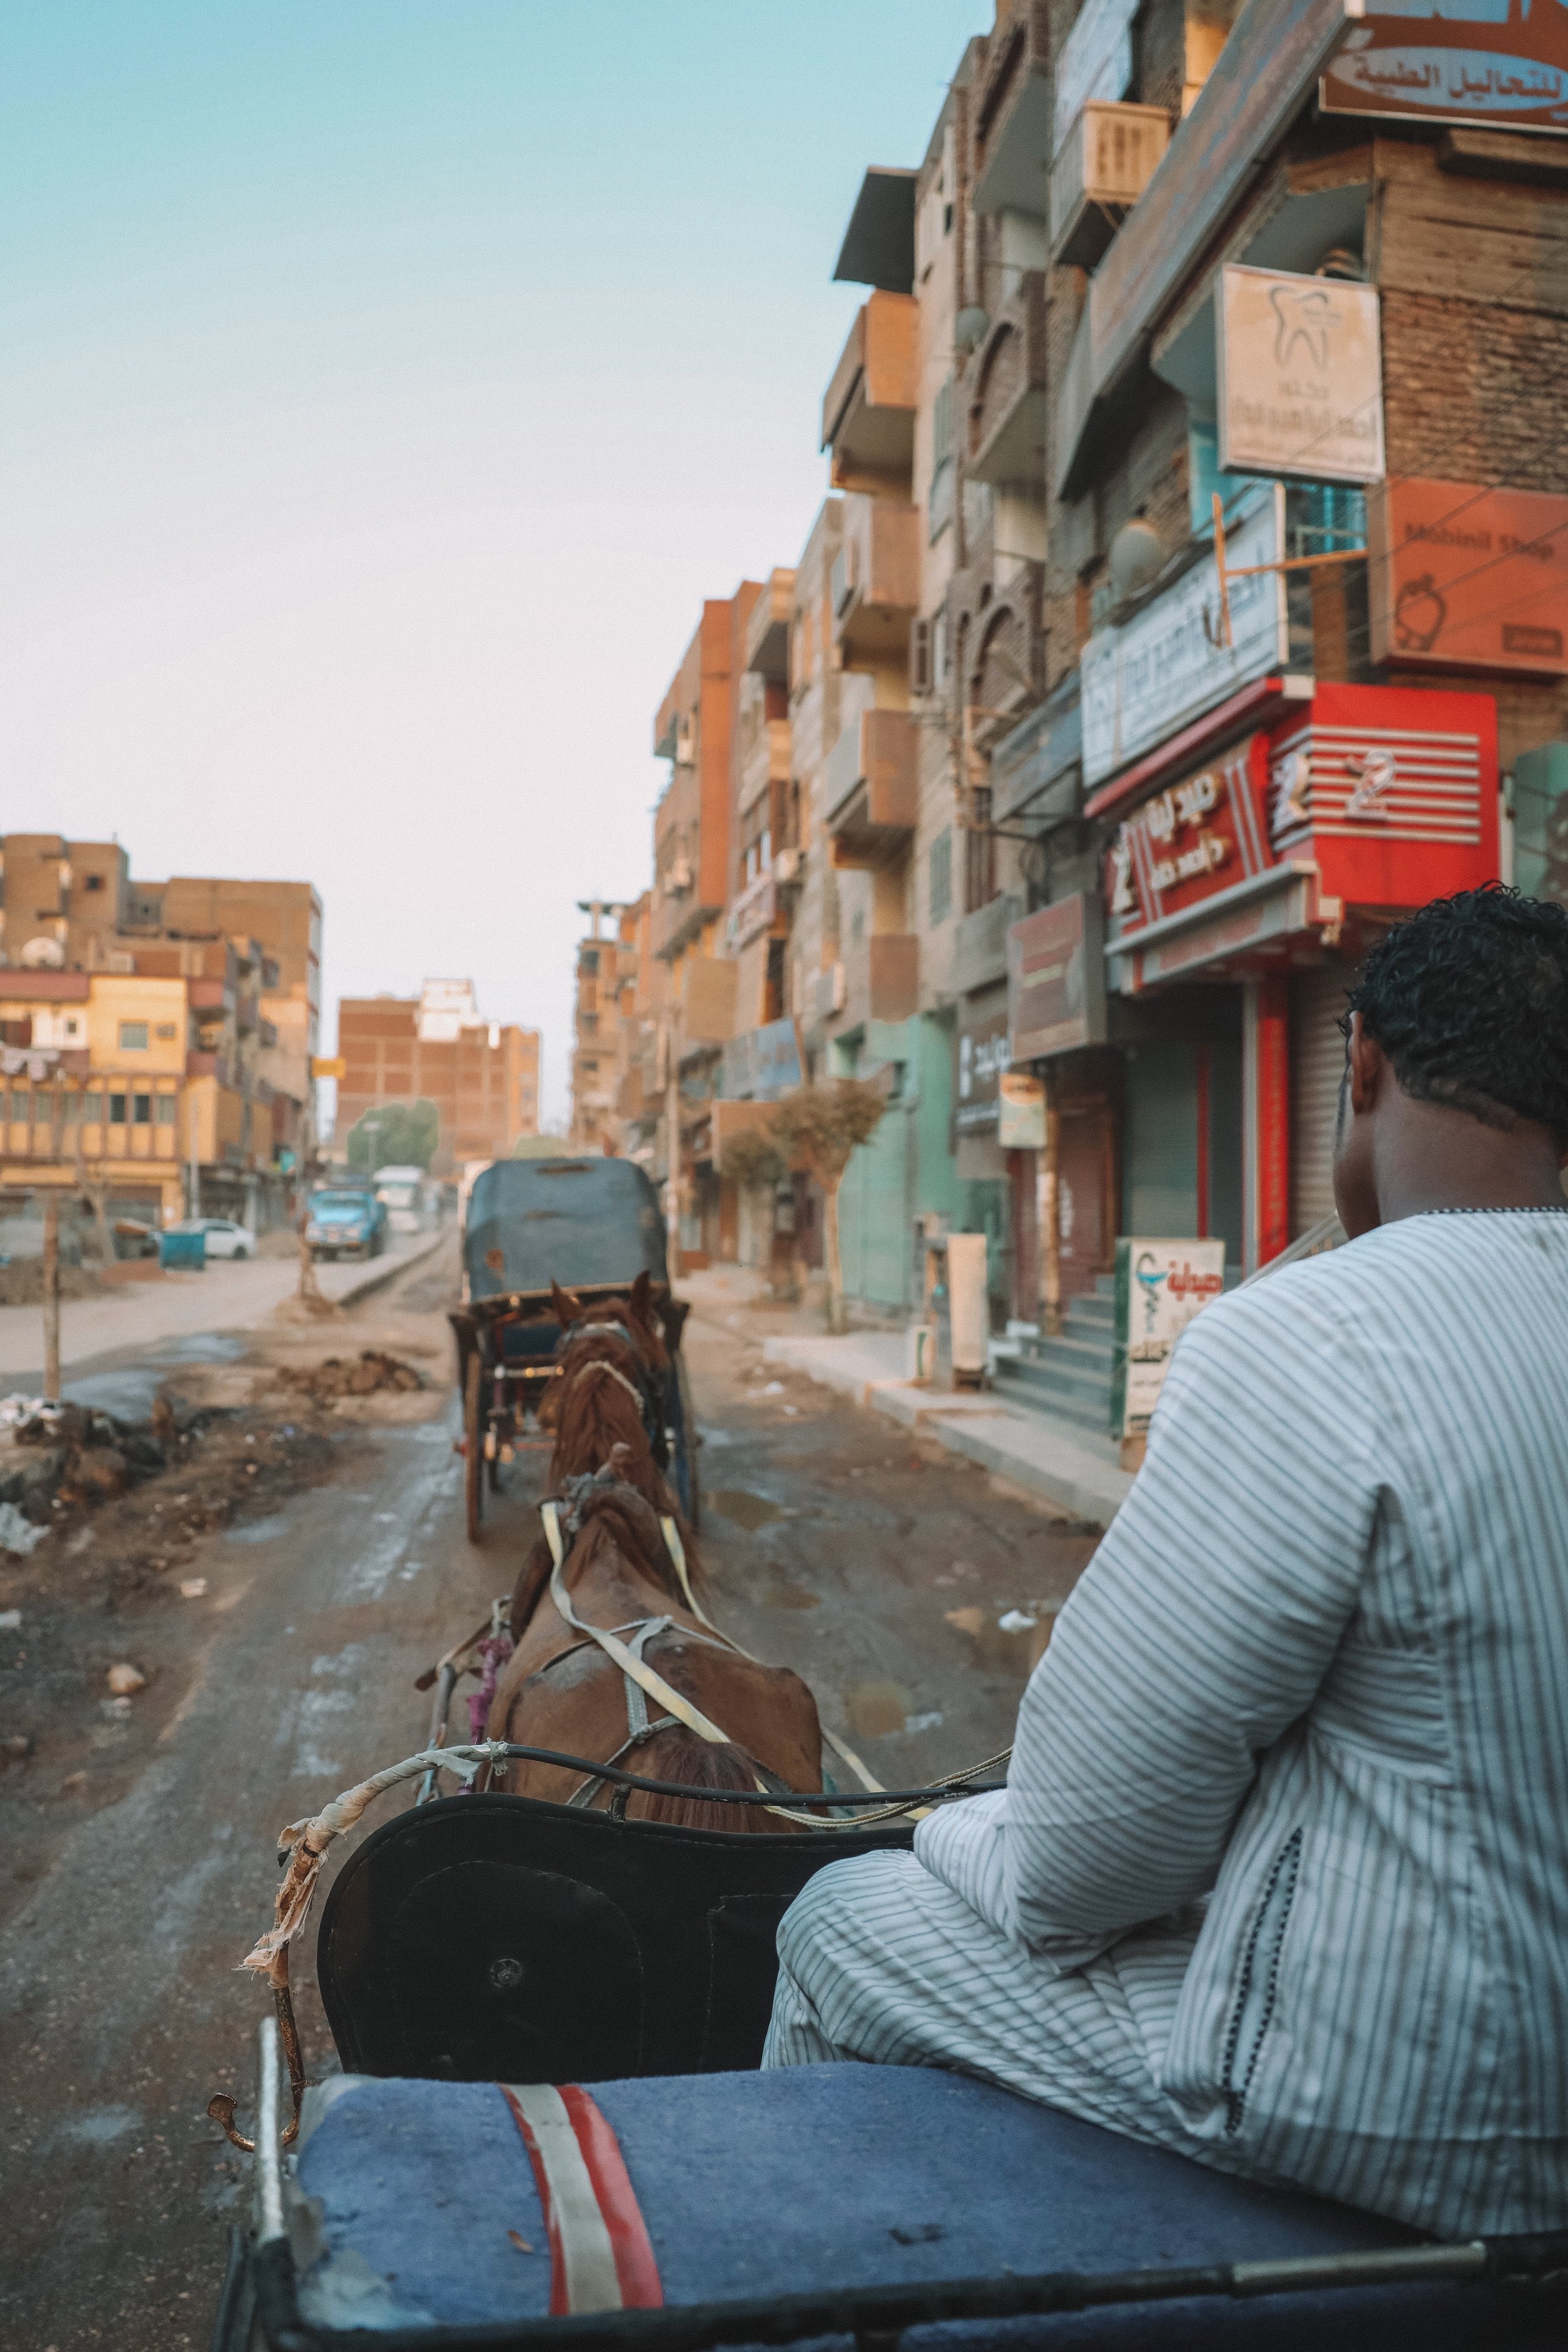 Ride to Edfu by horse cabriolet - Egypt